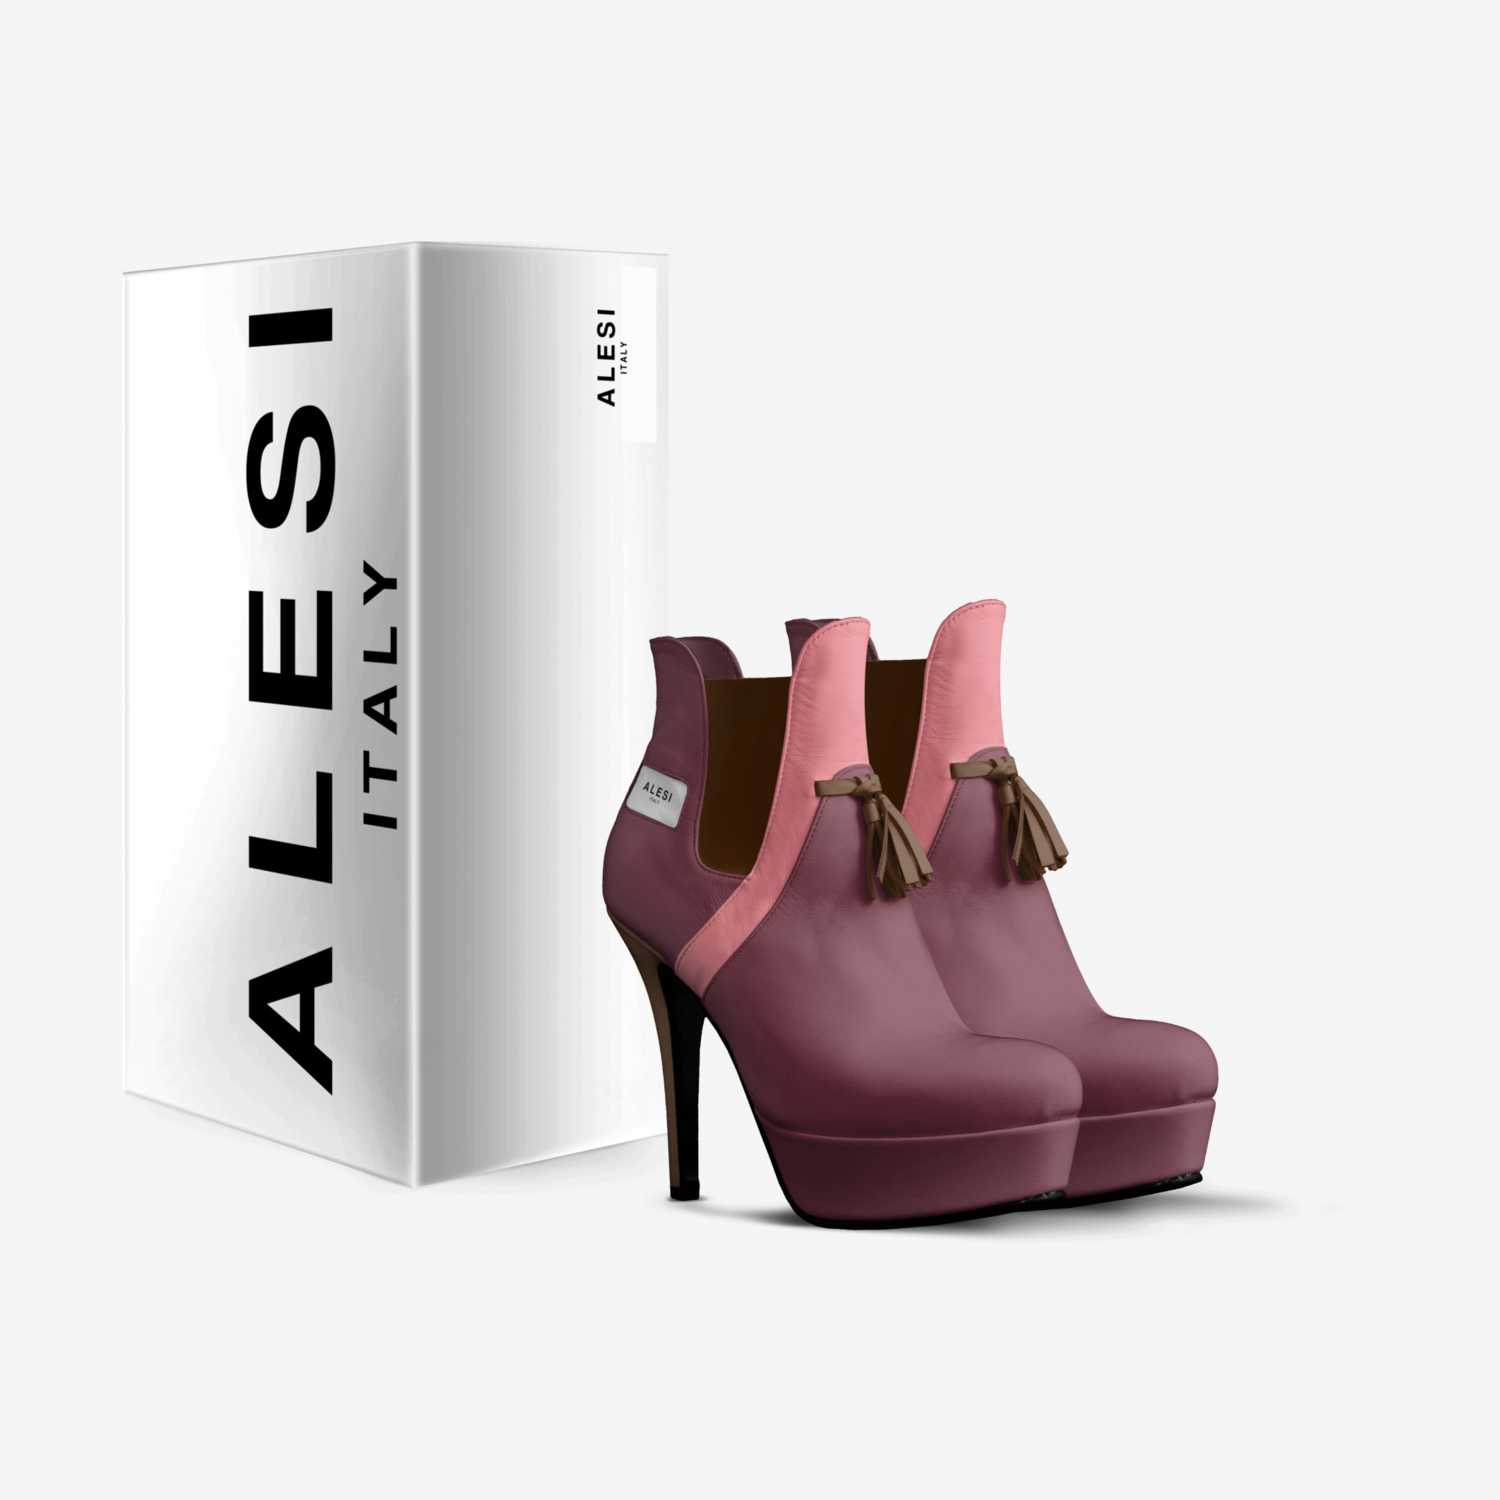 Alesi Tassel Pump custom made in Italy shoes by Lonanthony Parker | Box view